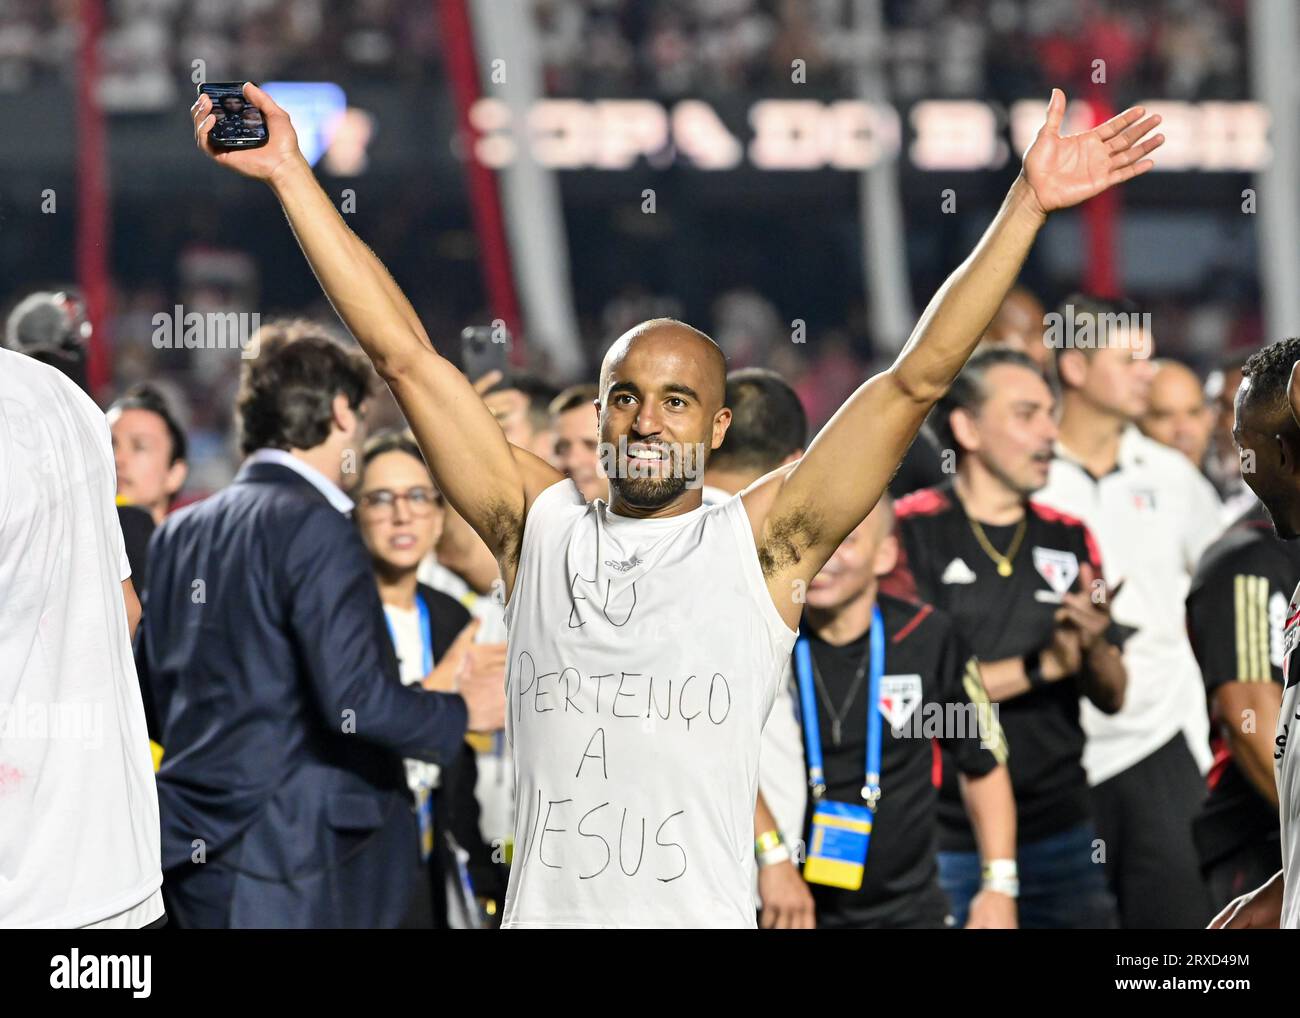 Sao Paulo, Brazil. 24th Sep, 2023. Lucas Moura of Sao Paulo celebrate the title of champion after the match between Sao Paulo and Flamengo, for the second leg of Final Brazil Cup 2023, at Morumbi Stadium, in Sao Paulo on September 24. Photo: Gledston Tavares/DiaEsportivo/Alamy Live News Credit: DiaEsportivo/Alamy Live News Stock Photo